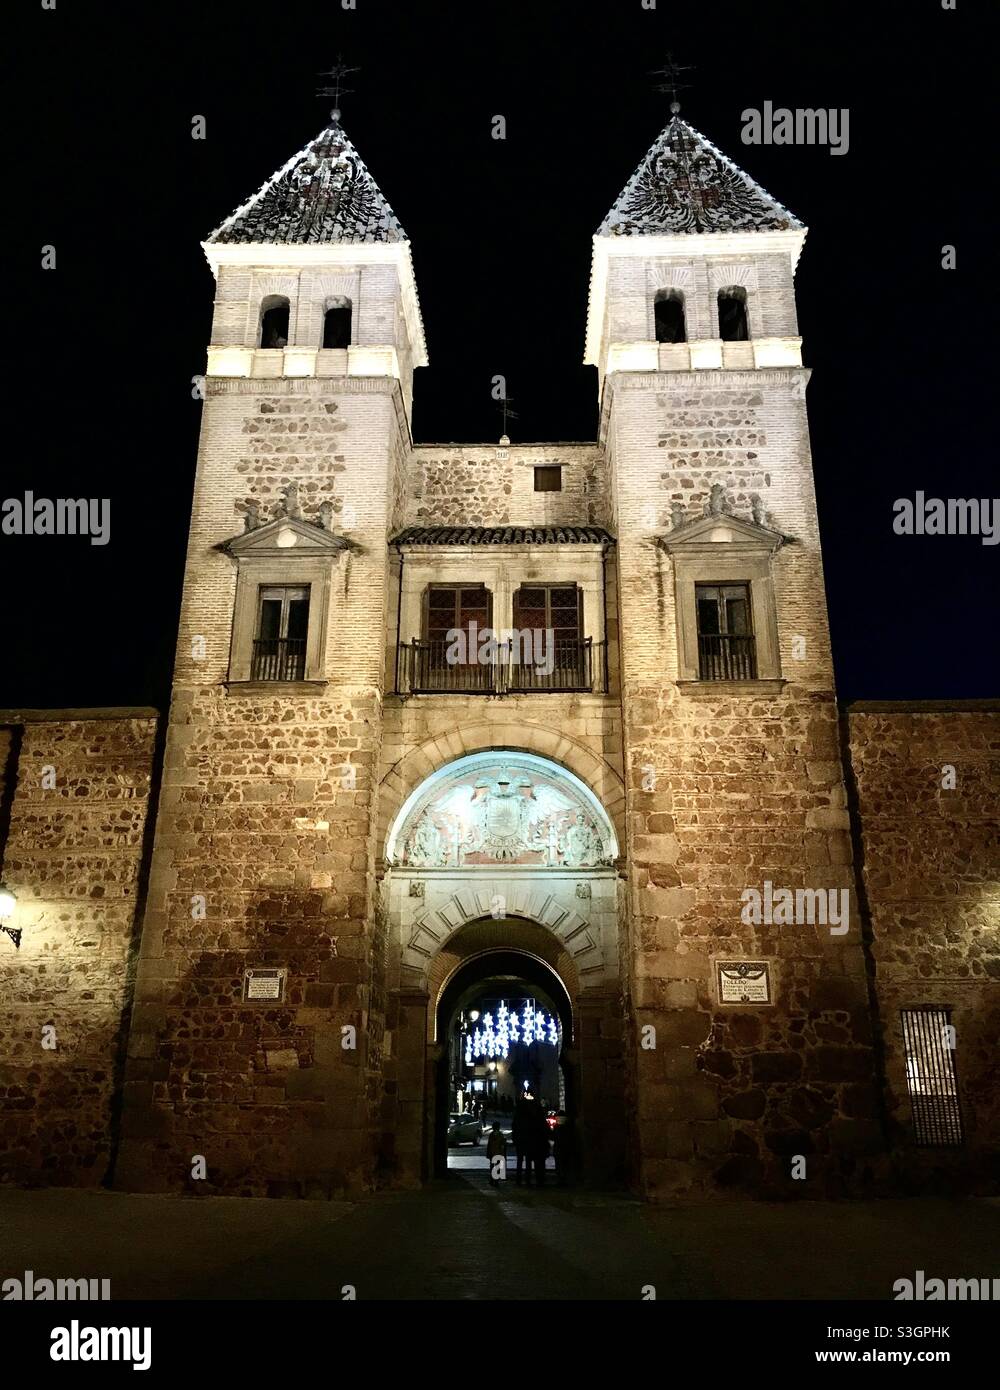 Night view of the ‘Puerta Bisagra’ (hinge door) built in the 16th century to give access to the city of Toledo, Spain. Stock Photo